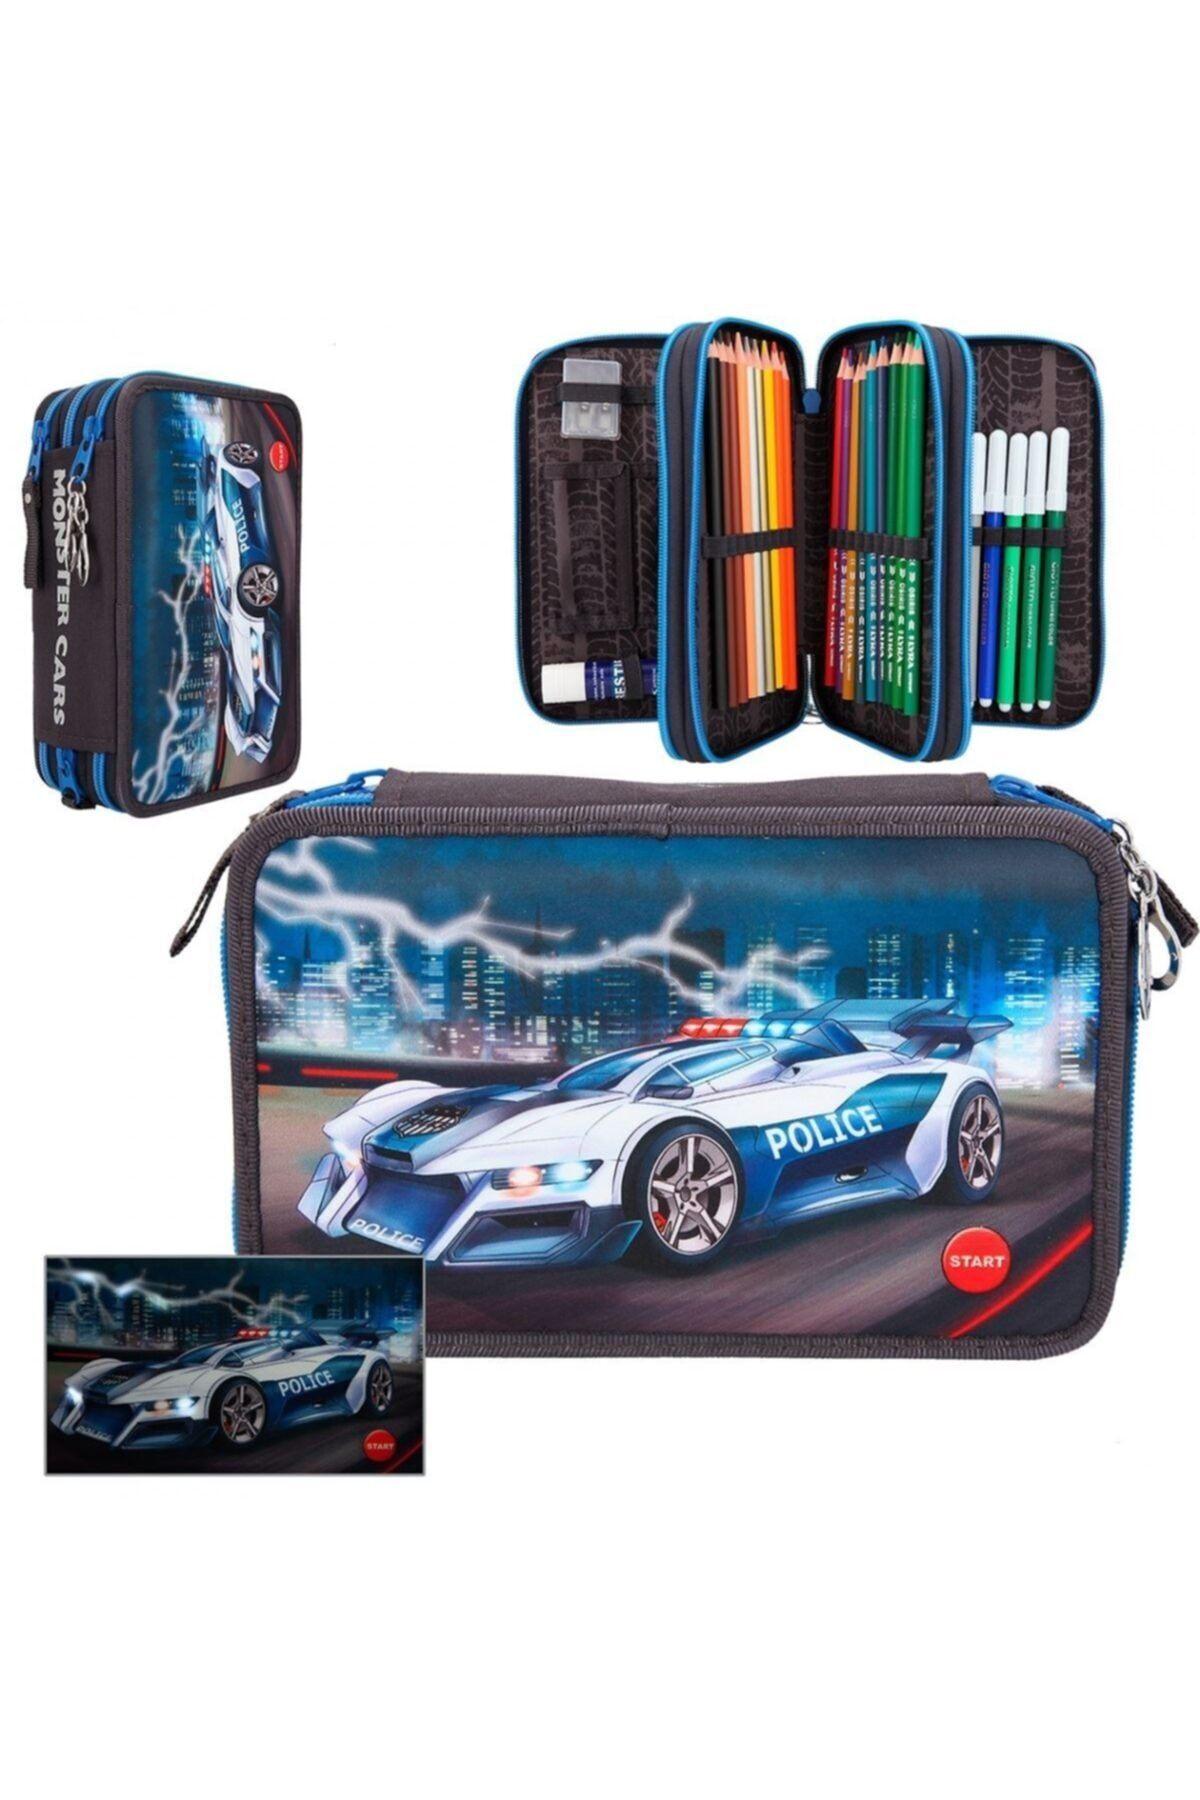 Top Model Monster Cars Filled Triple Pencil Case With Led Police Car